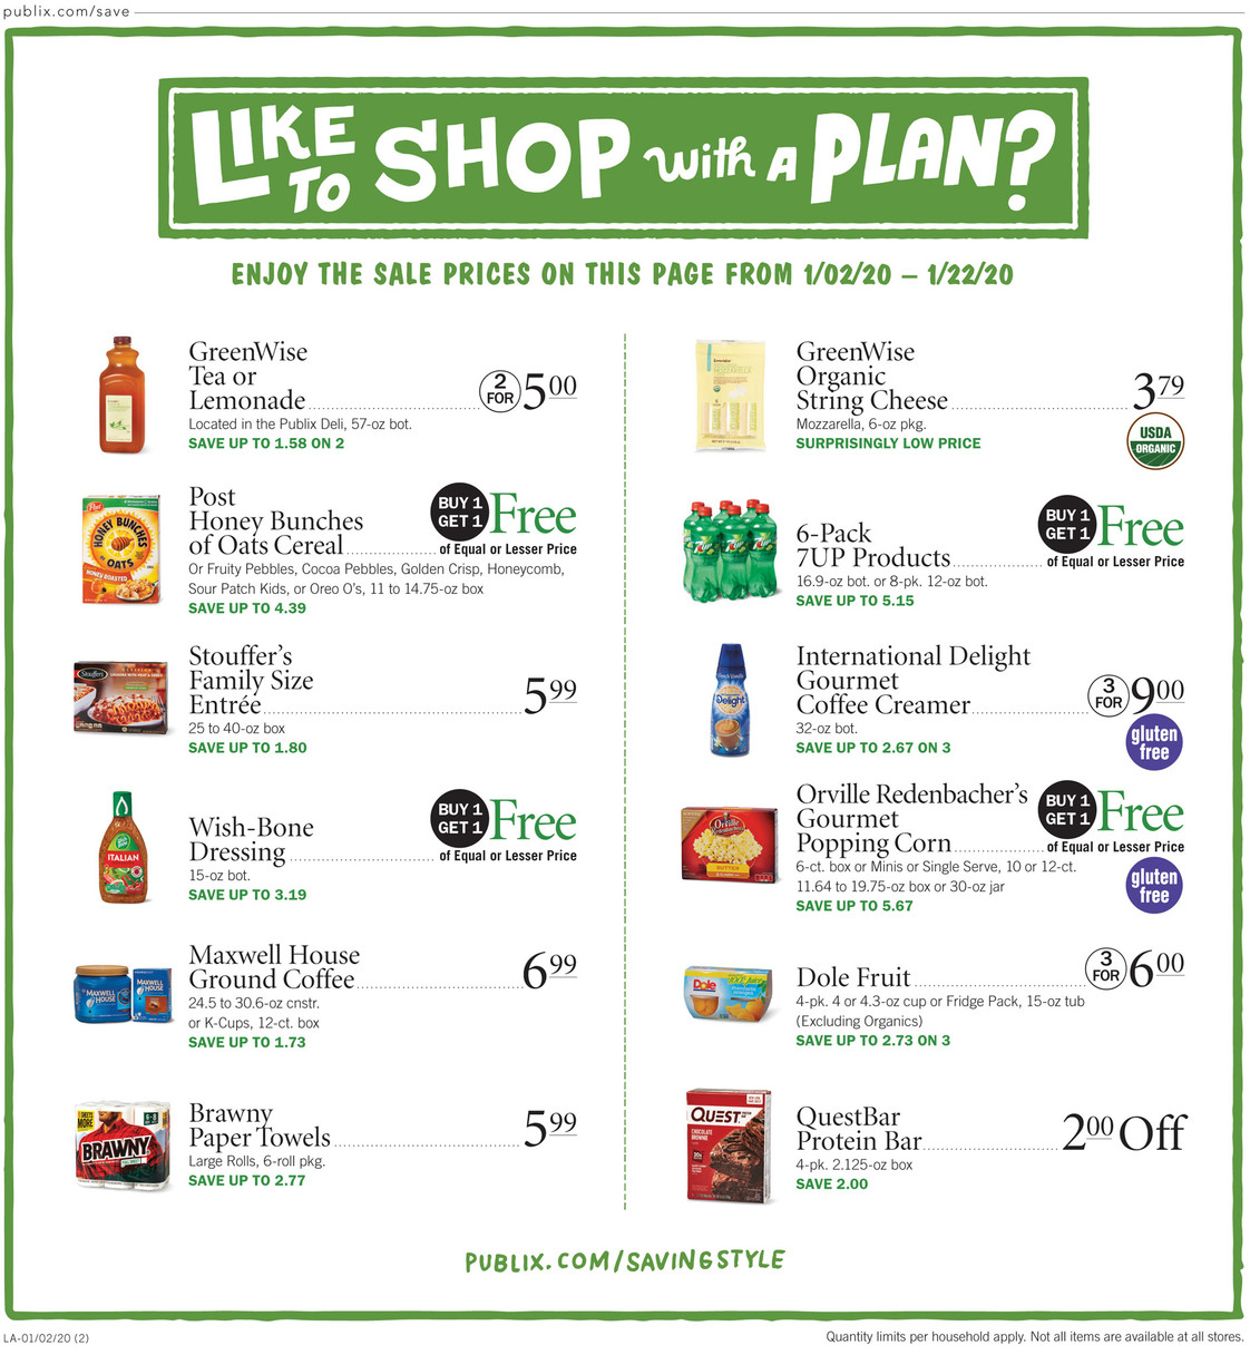 Publix Ad from 01/16/2020